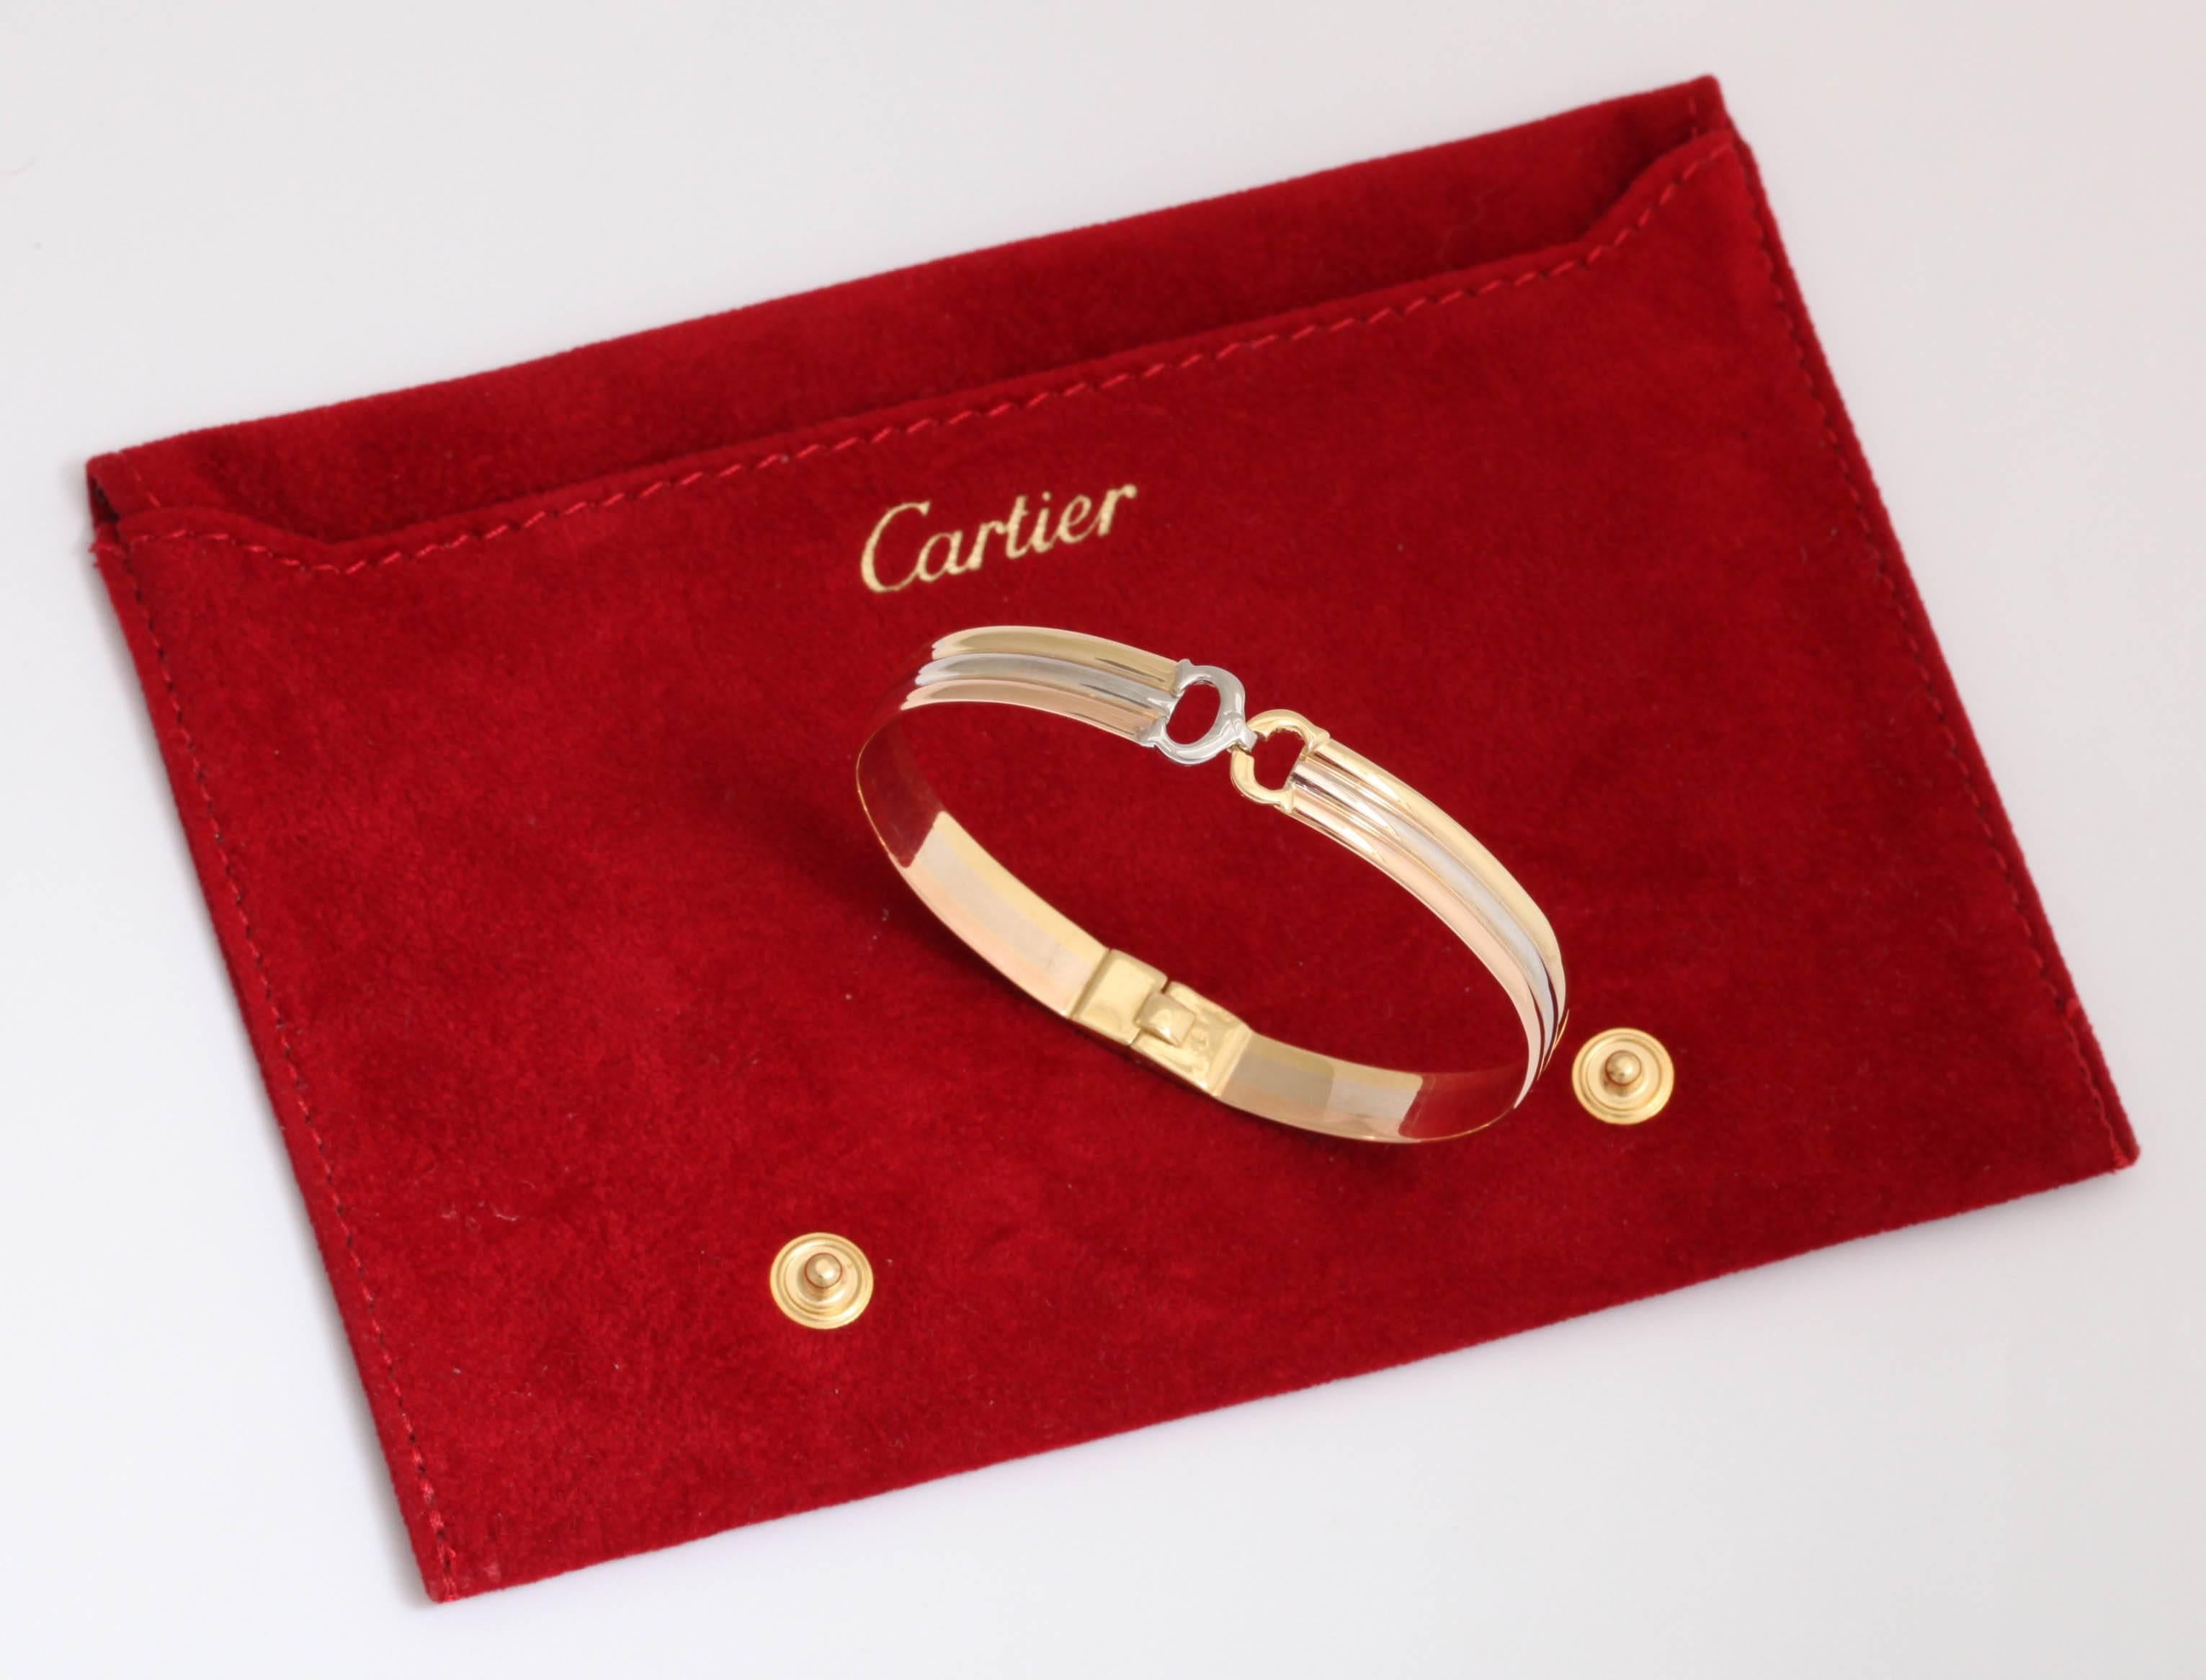 A Classic stylish 18-karat gold tricolor bangle by Cartier. The bangle ends in two intertwined C's, rose, white, yellow gold.